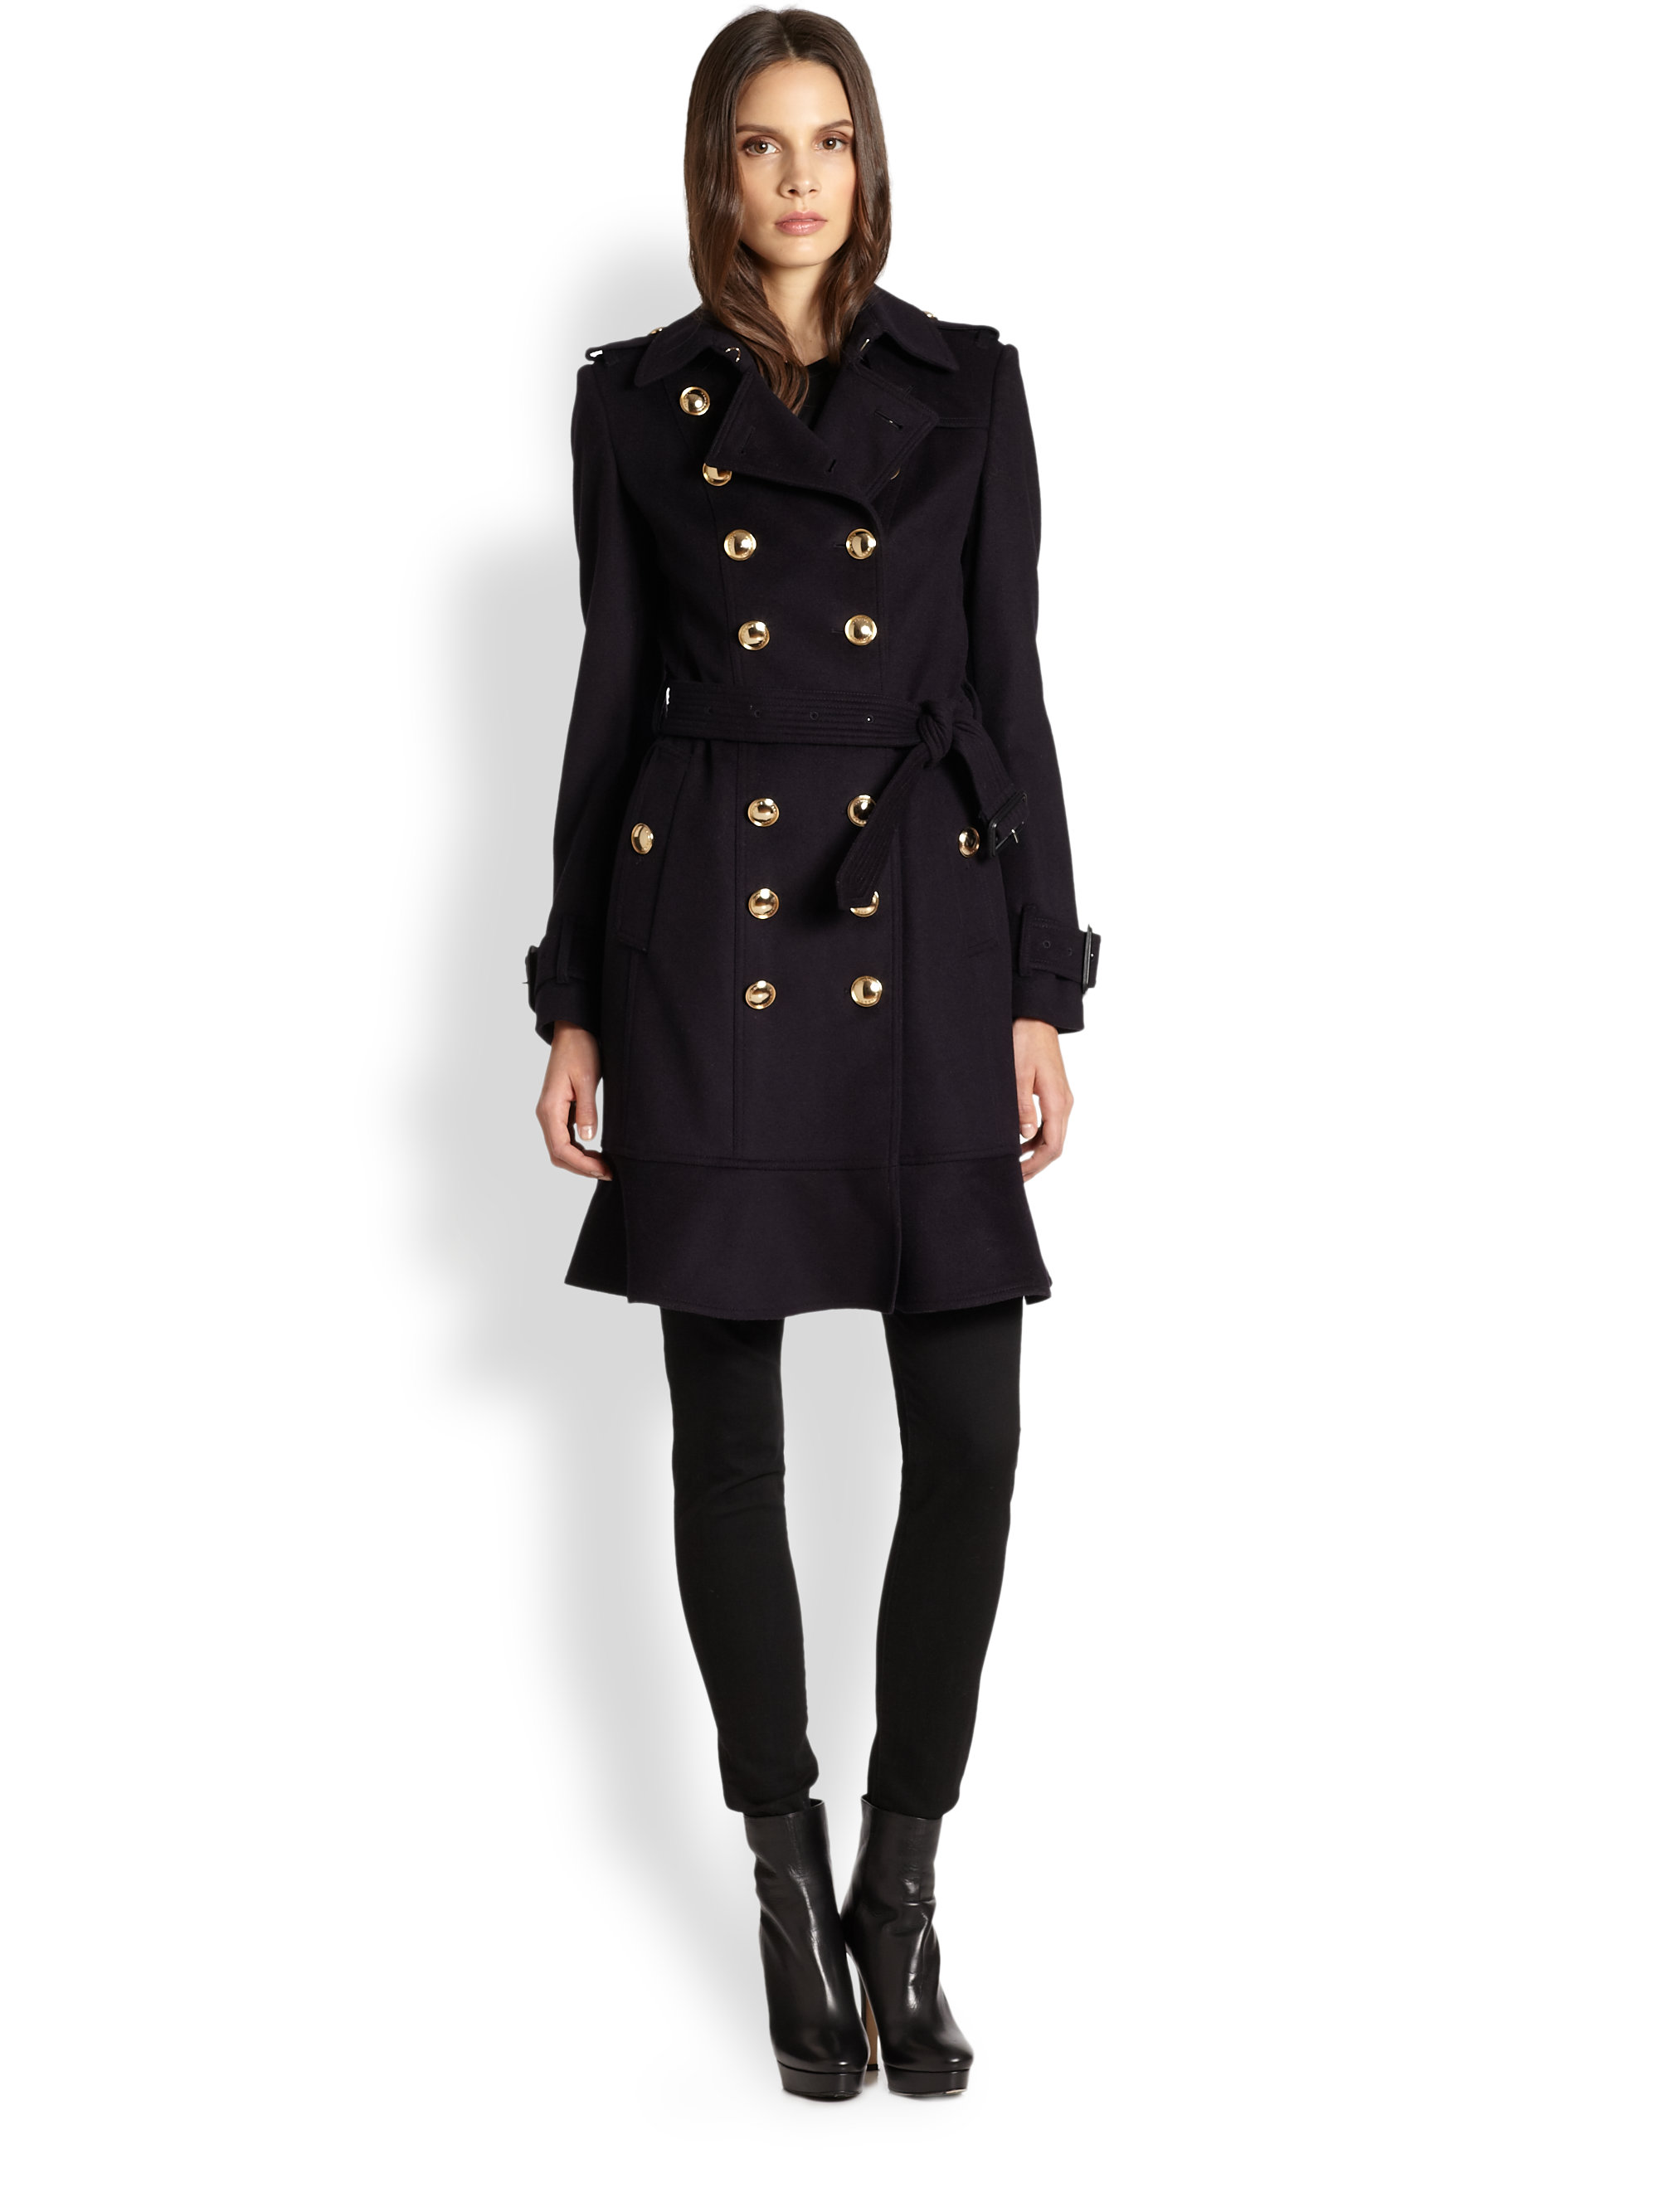 burberry black coat with gold buttons